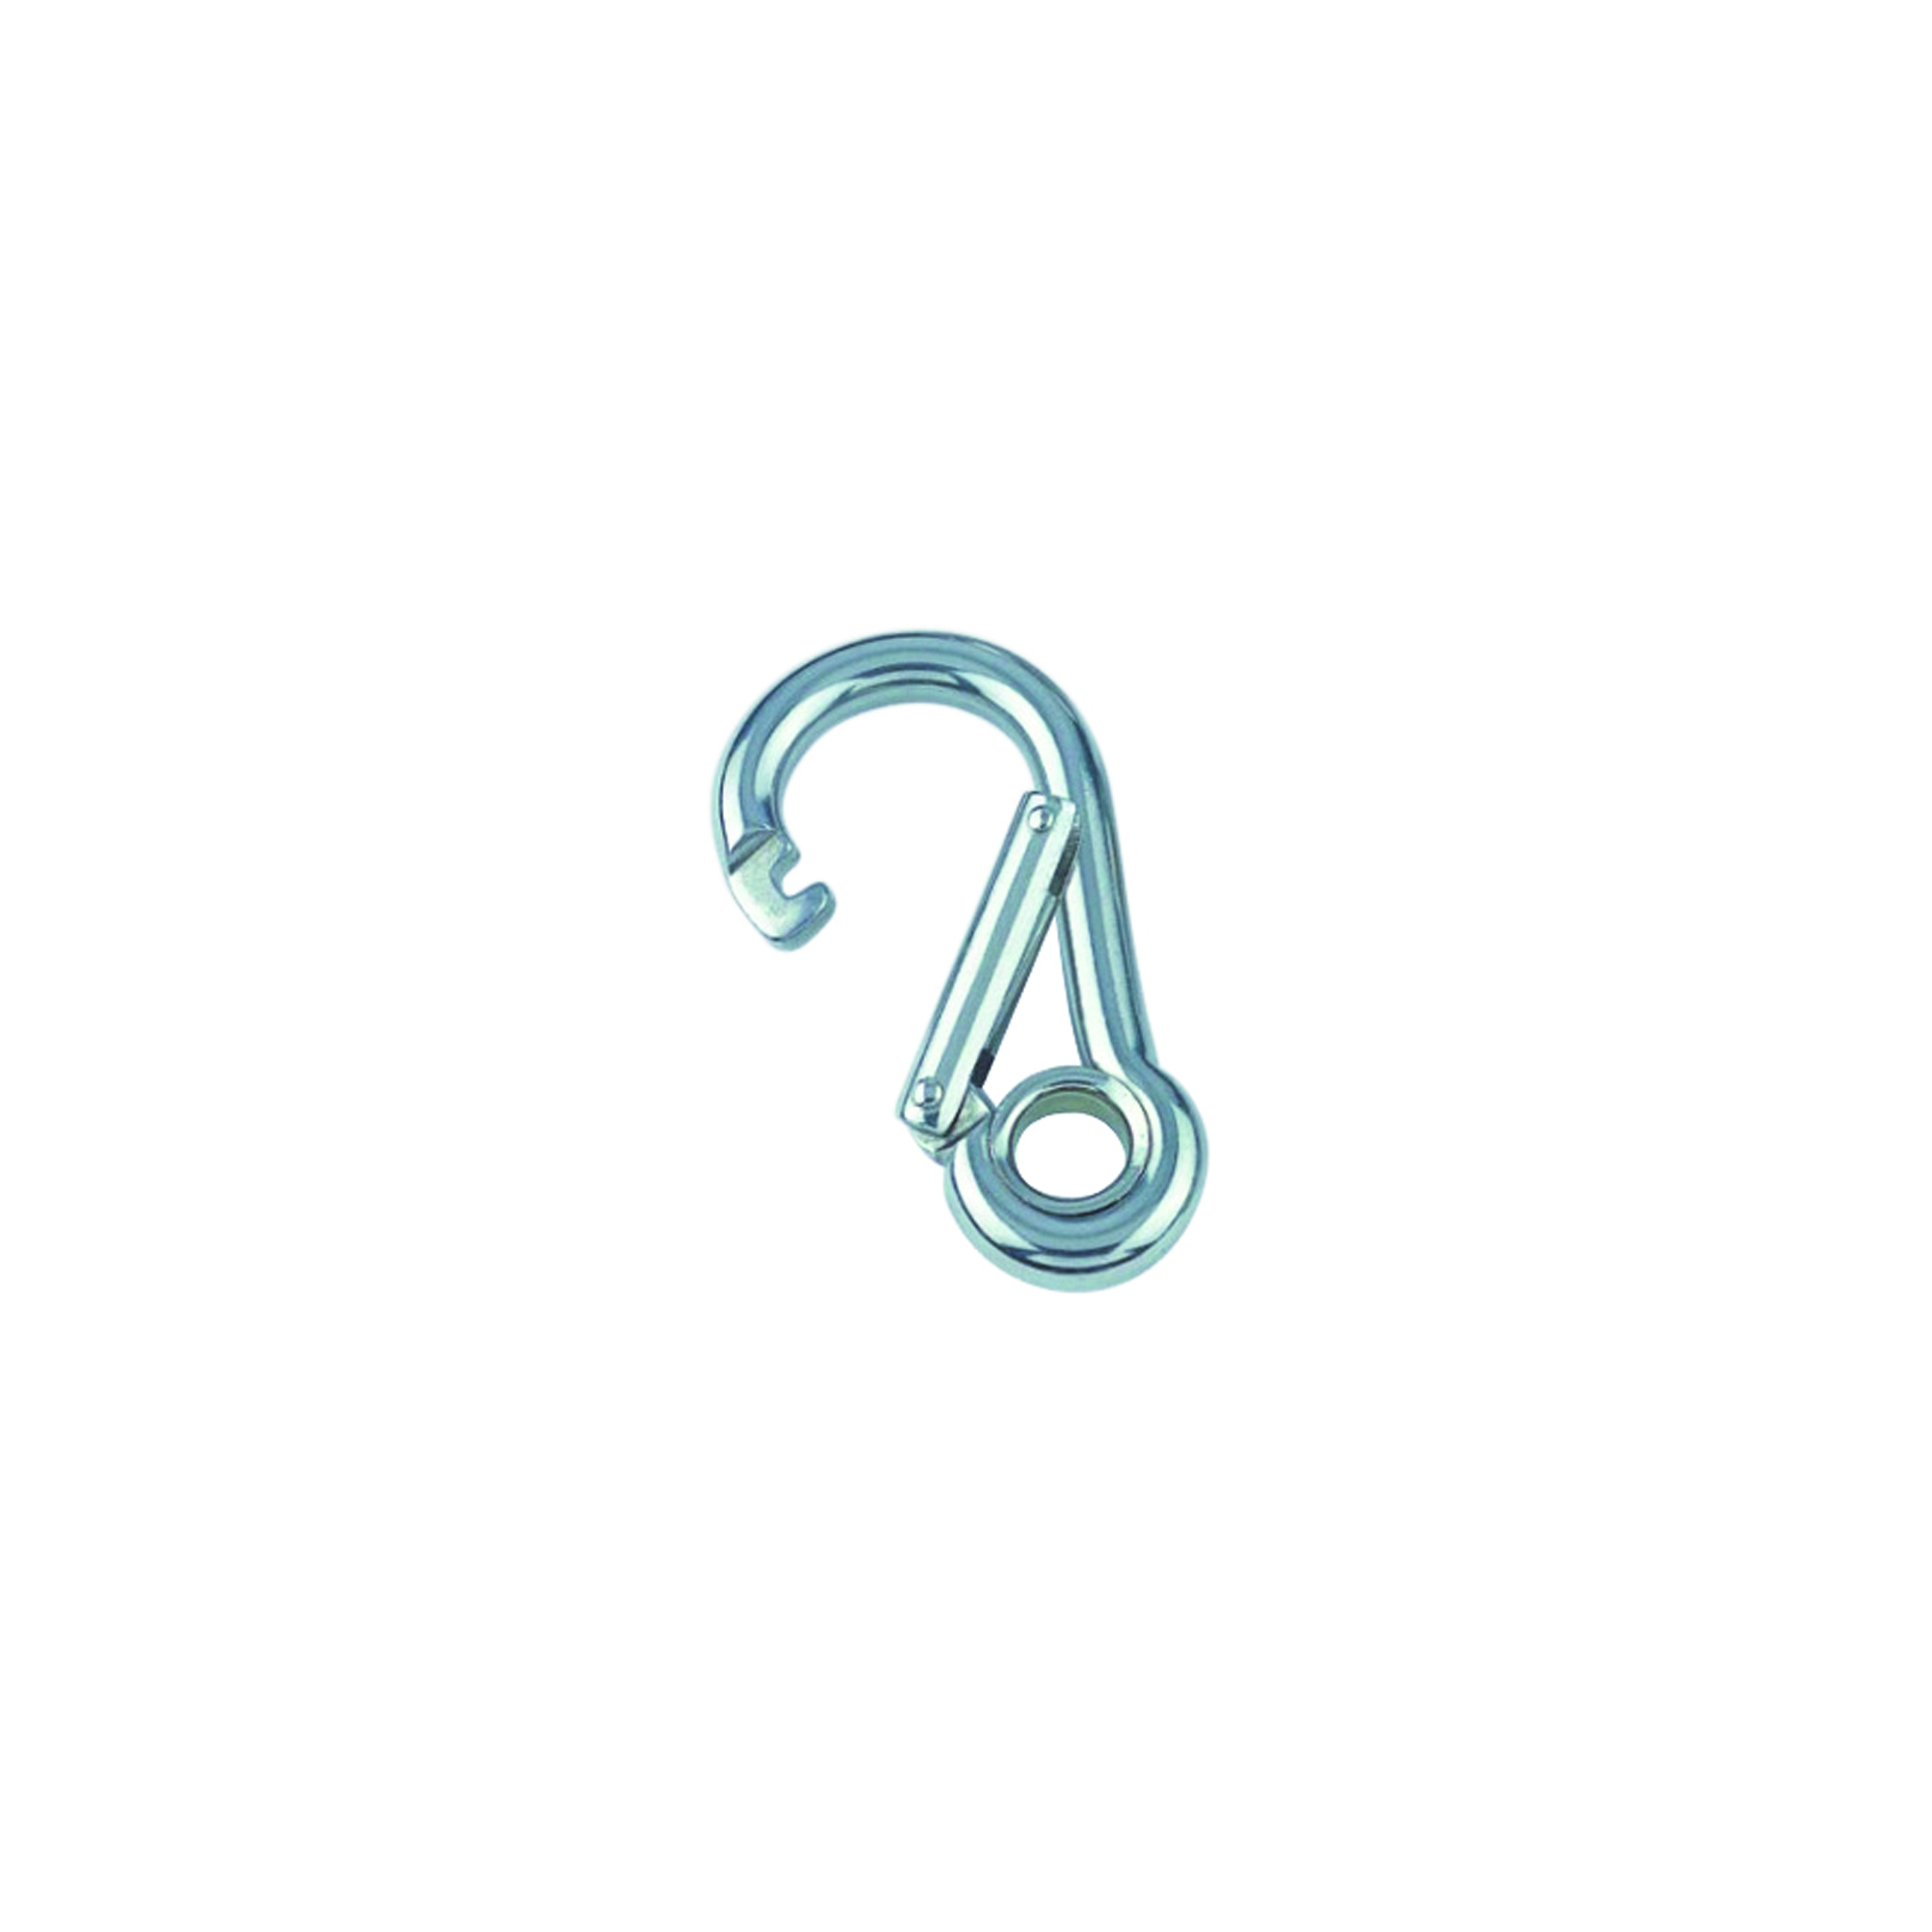 10 STCK / PCS. Spring hook with wide opening and eyelet A4  8x80mm